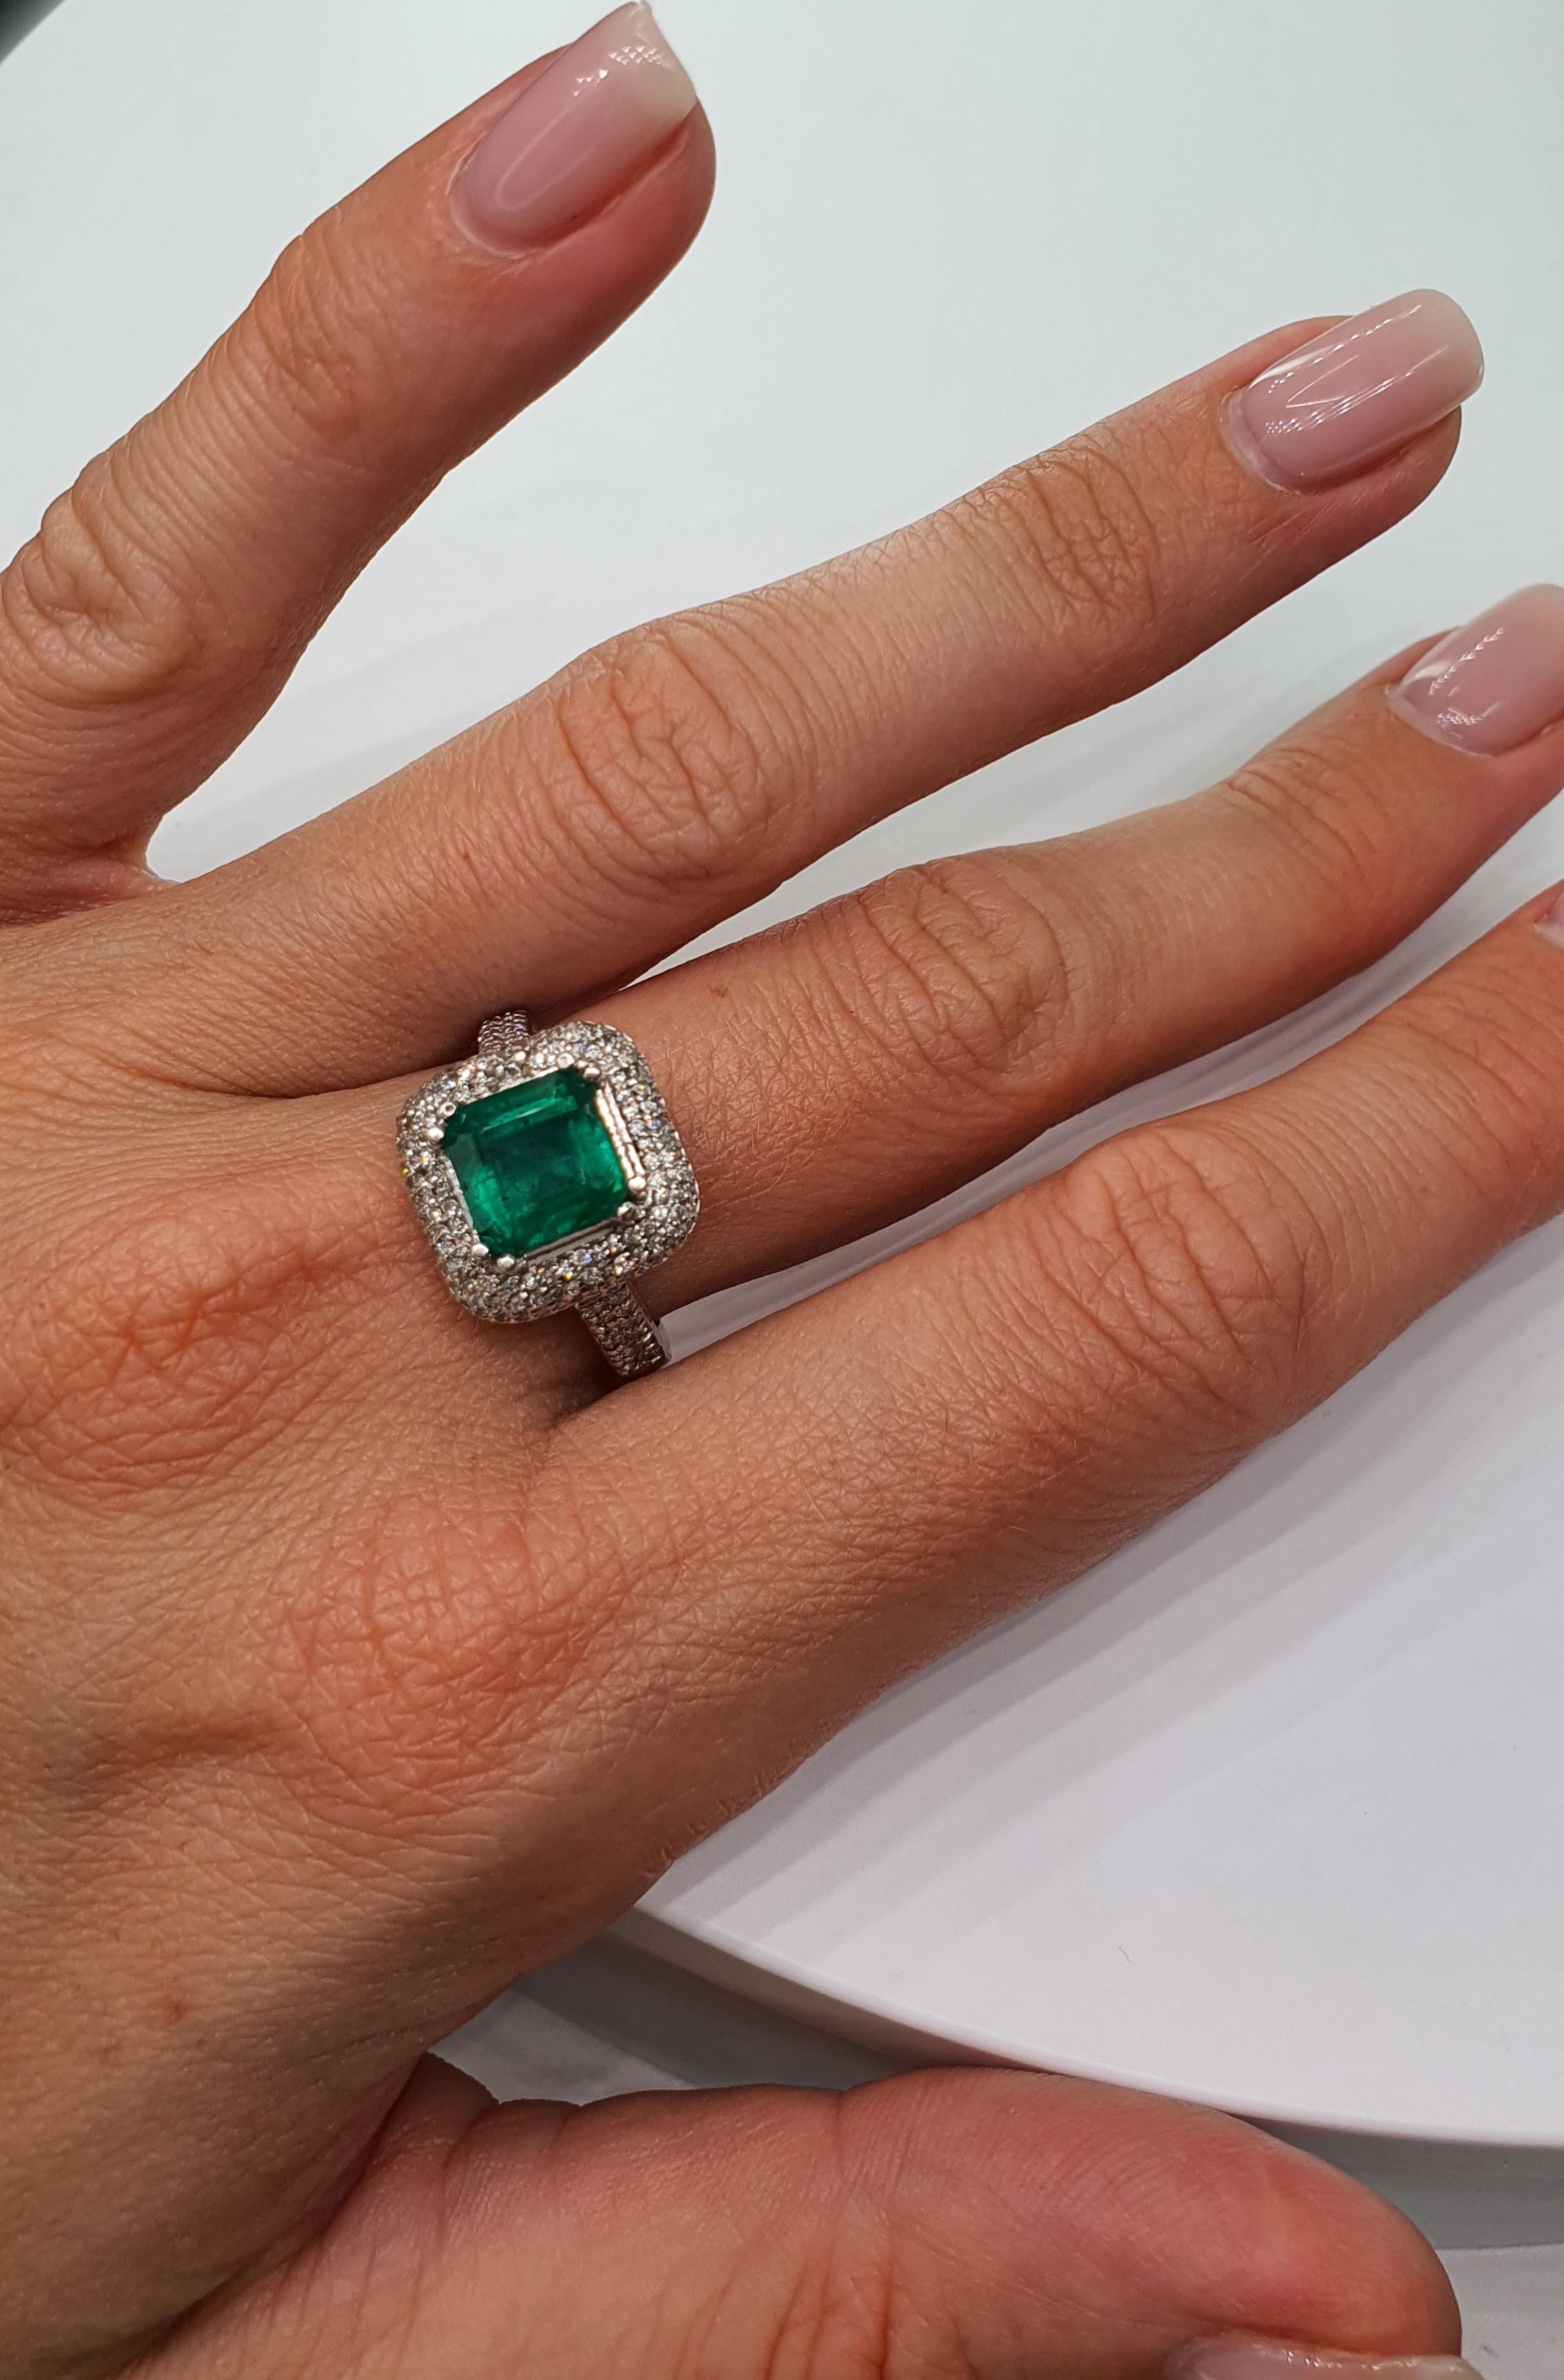 4.33 Carat Natural Emerald Diamond 18 Karat White Gold Ring In Excellent Condition For Sale In Montreux, VD